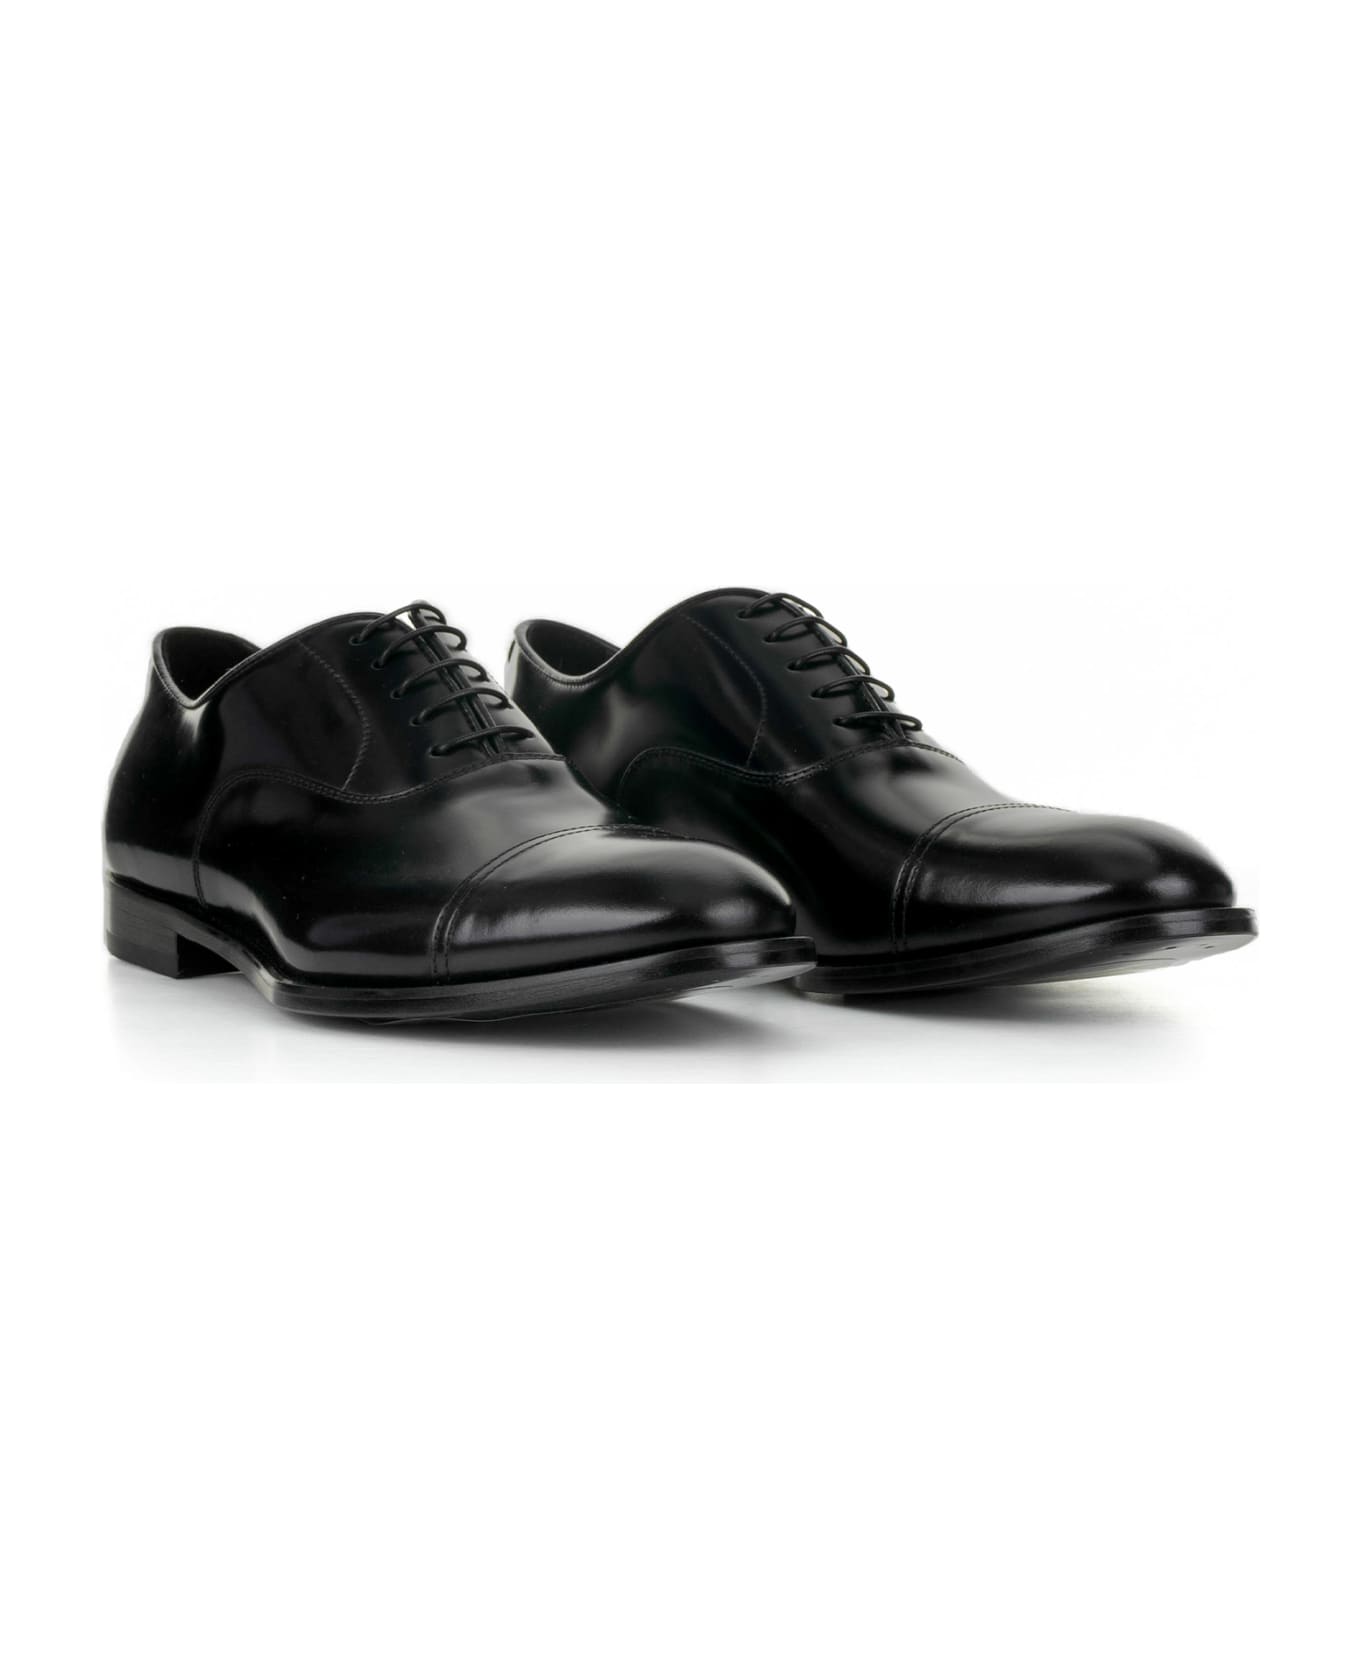 Doucal's Black Leather Oxford With Toe Cap - NERO